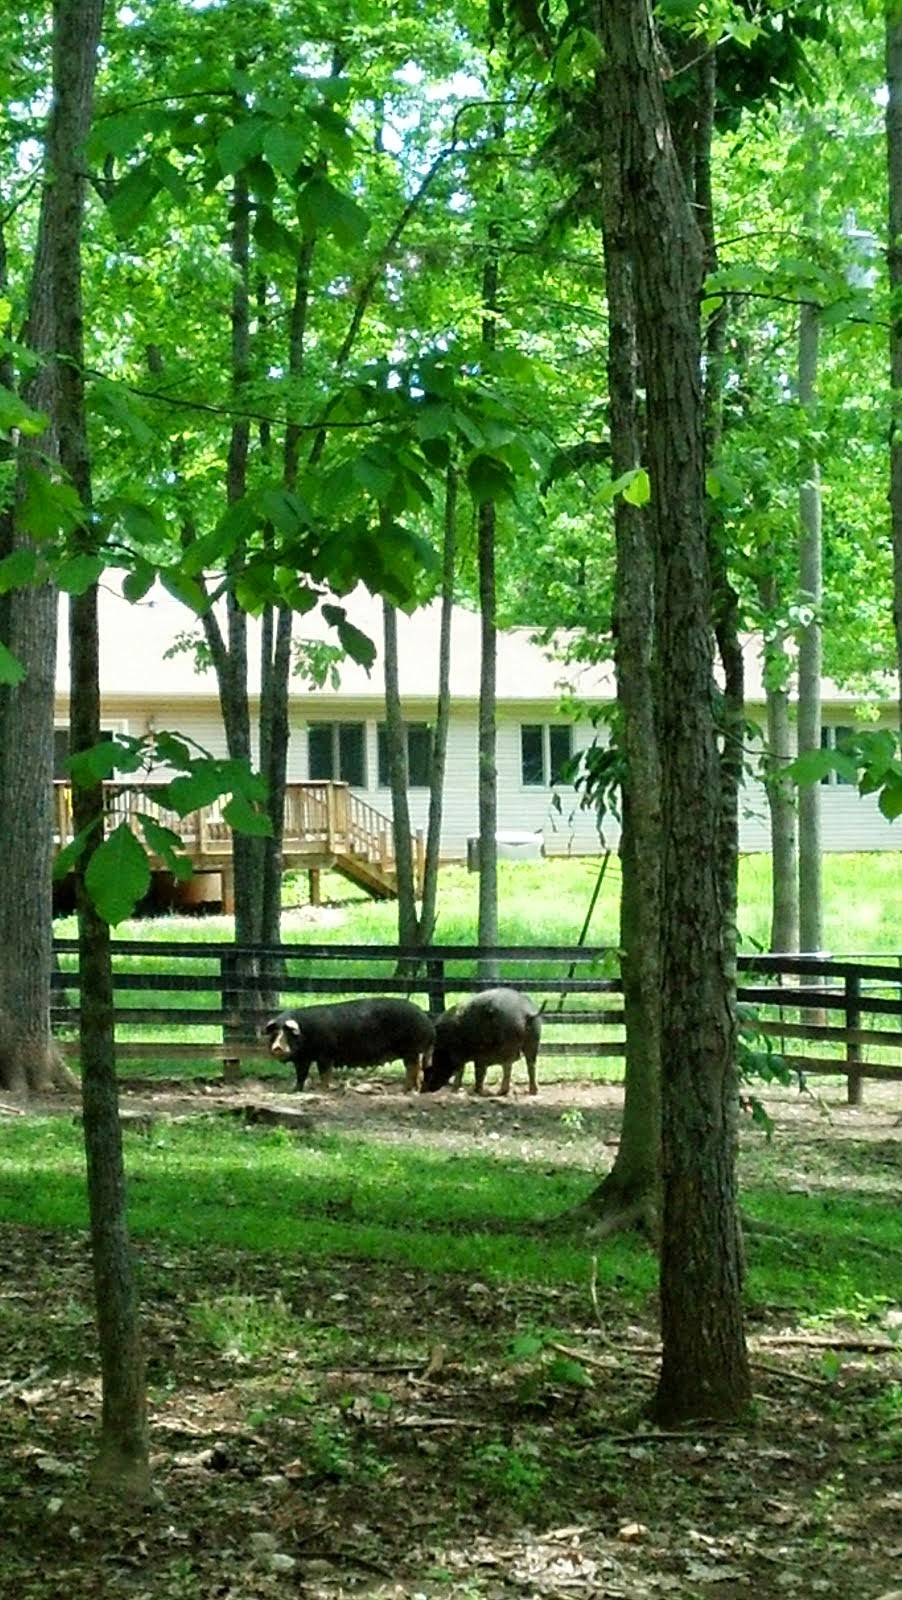 Sows on Pasture